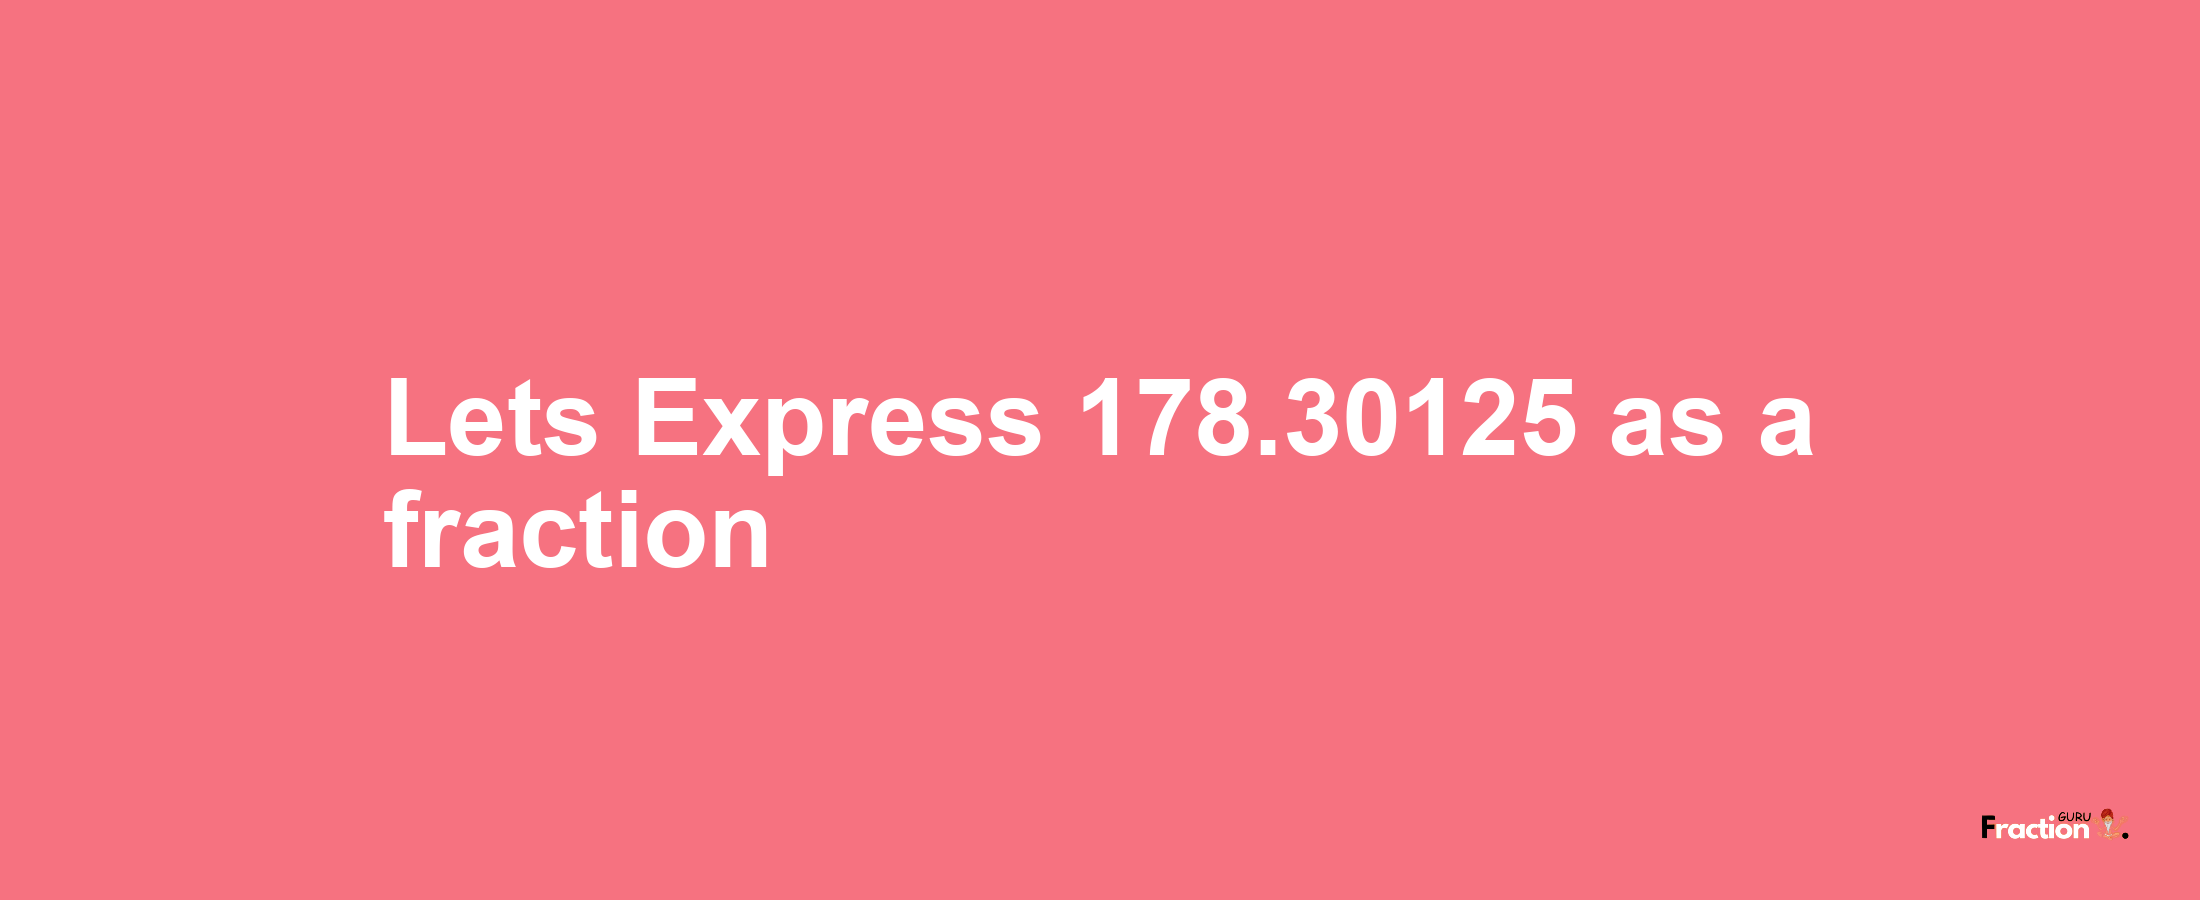 Lets Express 178.30125 as afraction